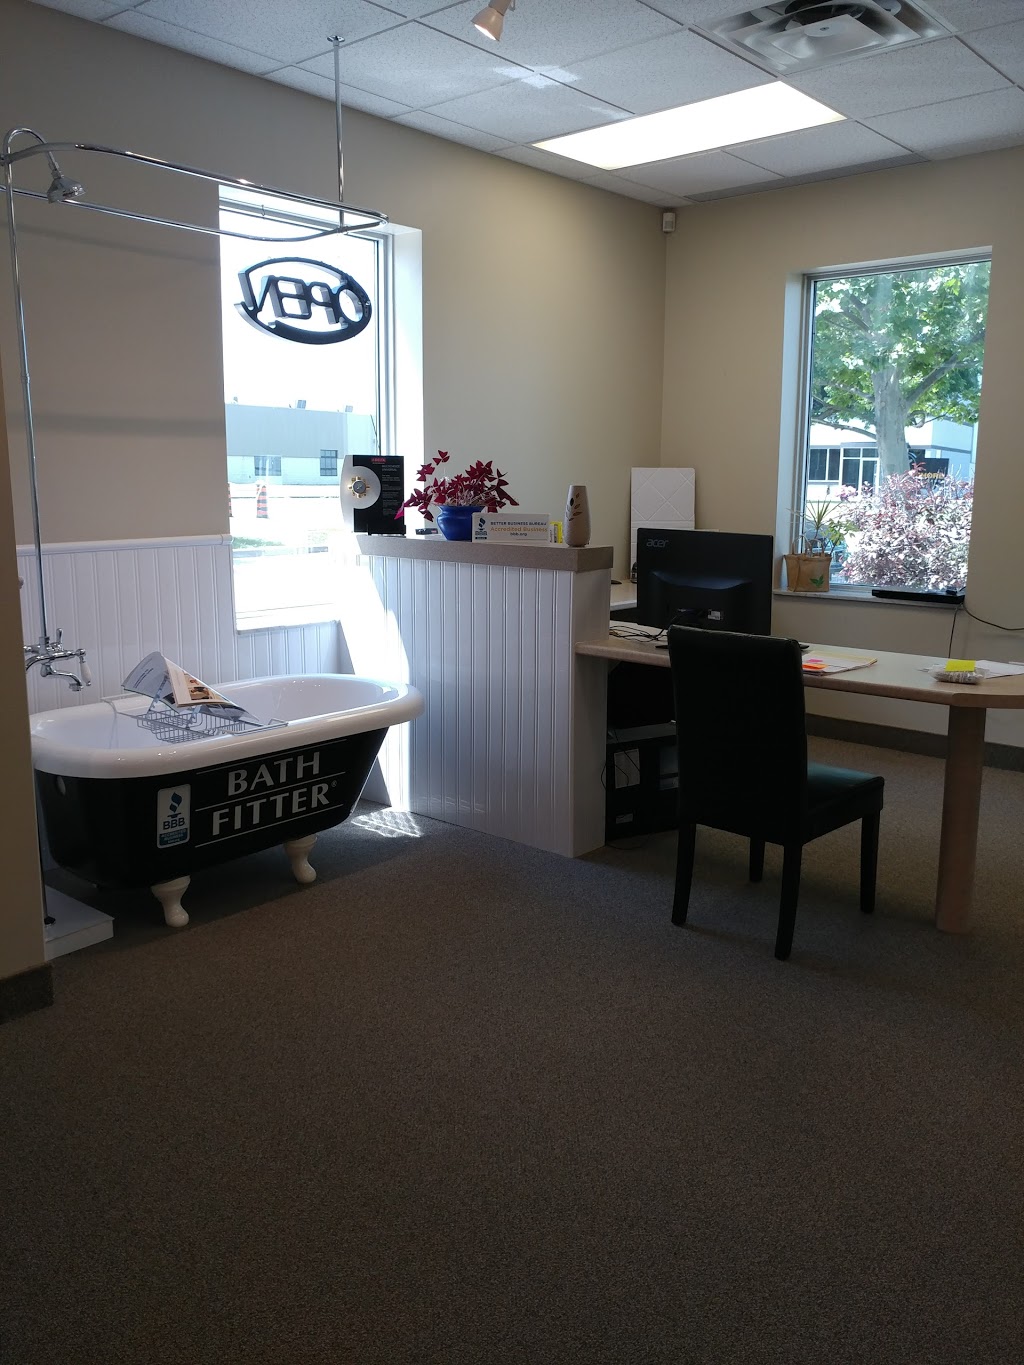 Bath Fitter | home goods store | 7950 Anchor Dr, Windsor, ON N8N 5E5, Canada | 5199792228 OR +1 519-979-2228